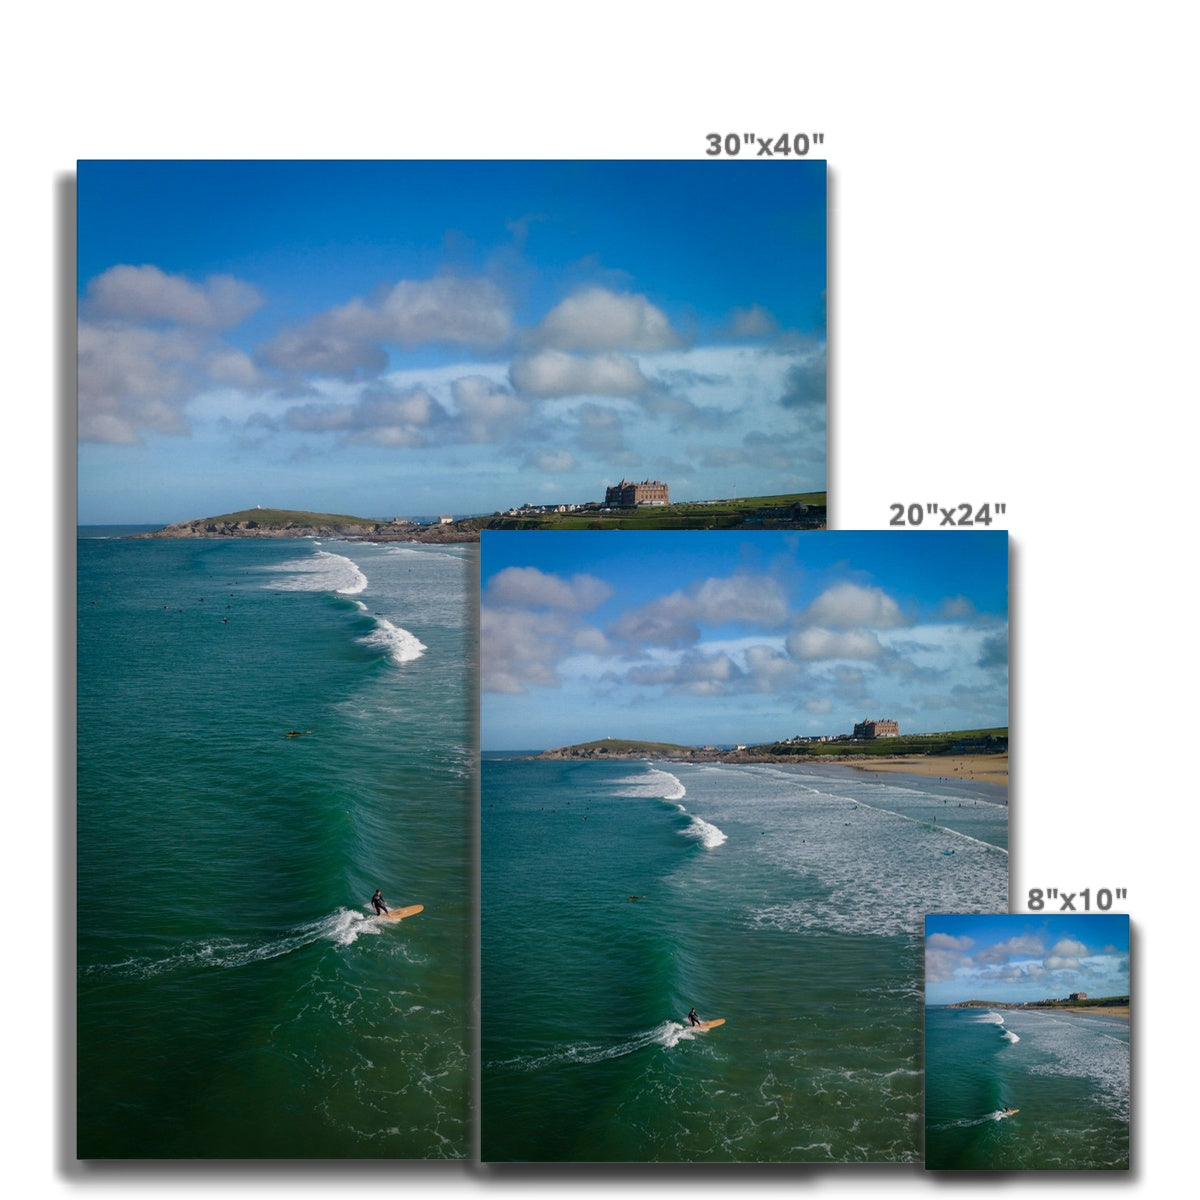 Fistral Surf ~ Canvas